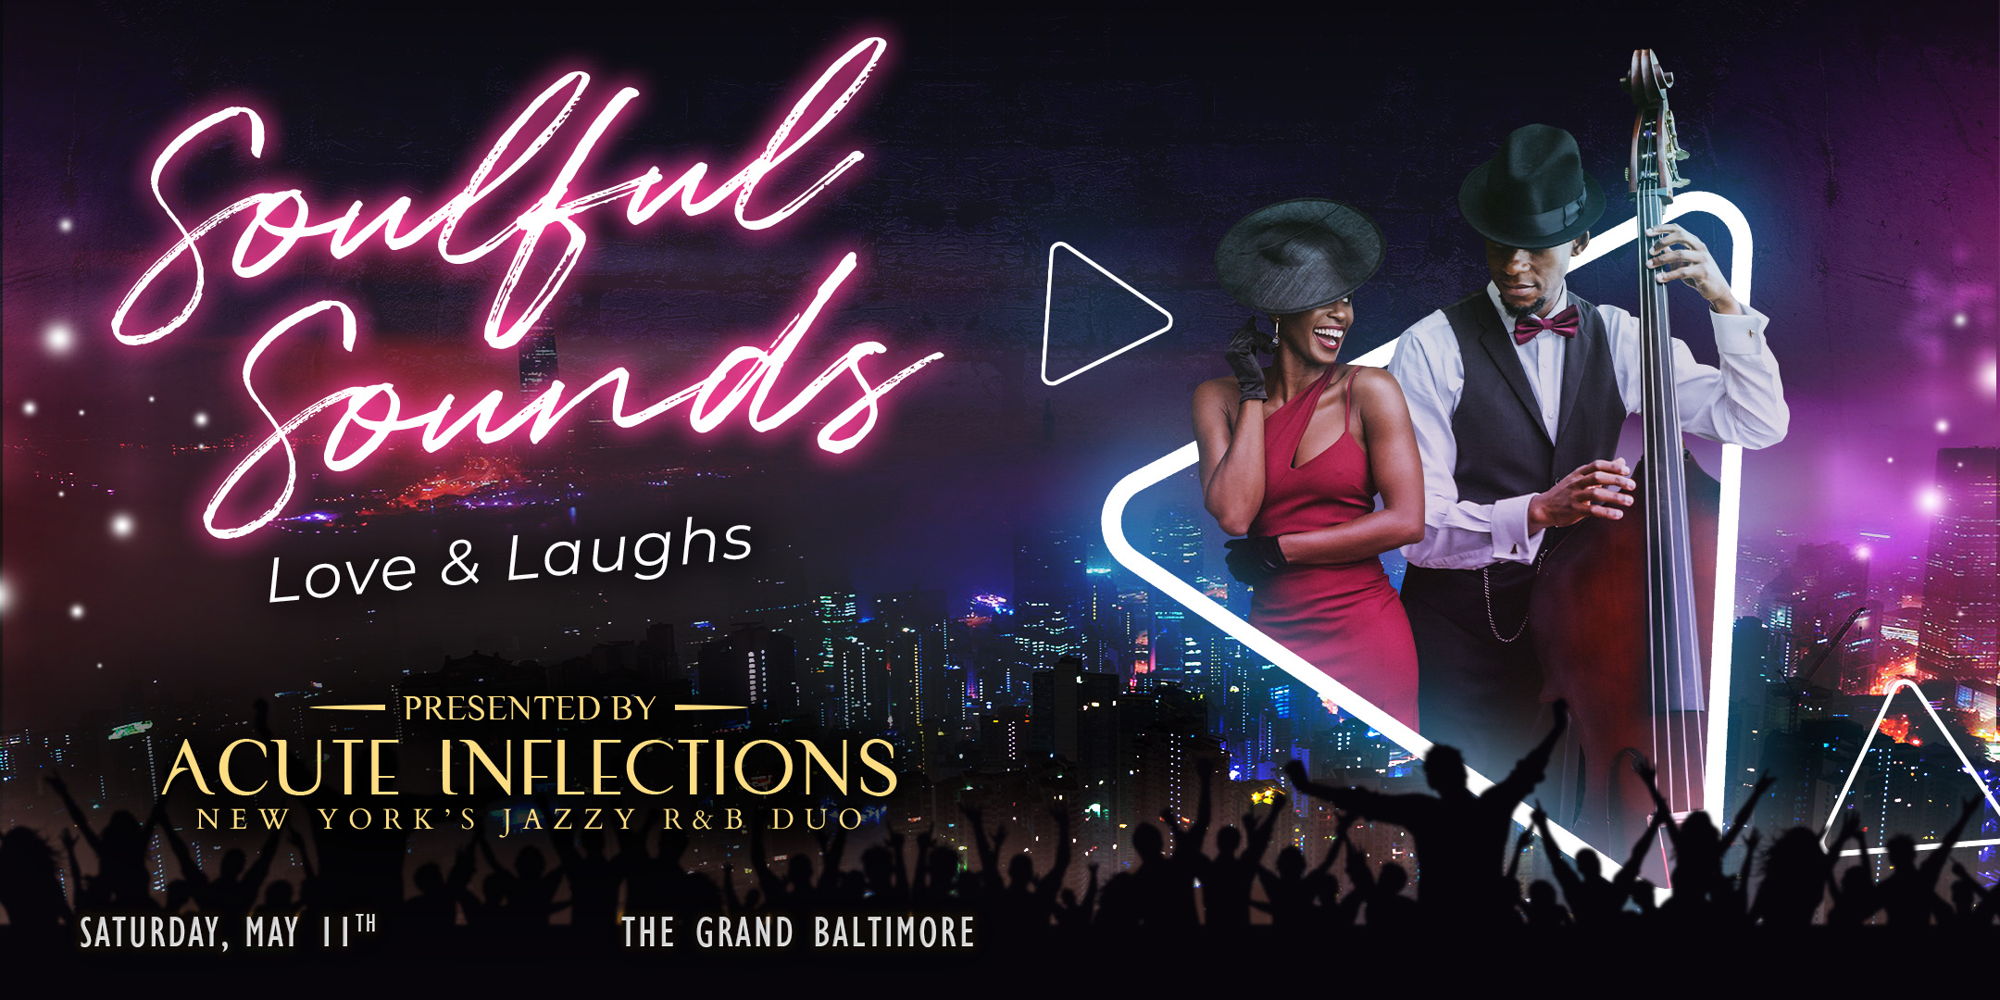 Soulful Sounds in Baltimore promotional image